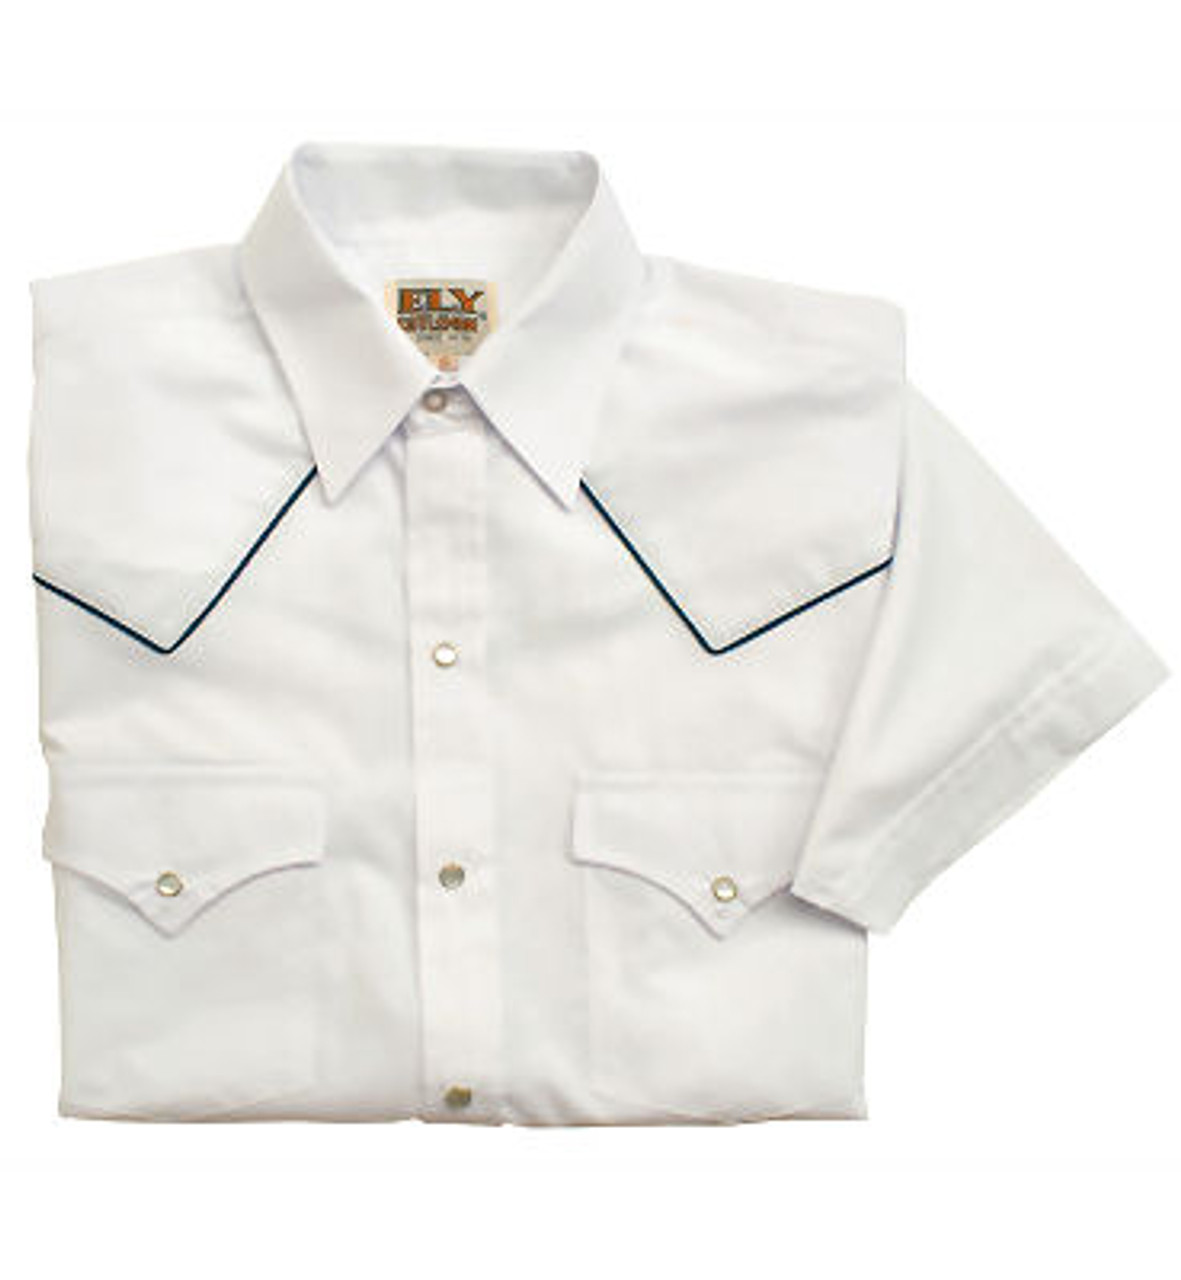 Piped western yoke short sleeved shirt for your steakhouse servers!